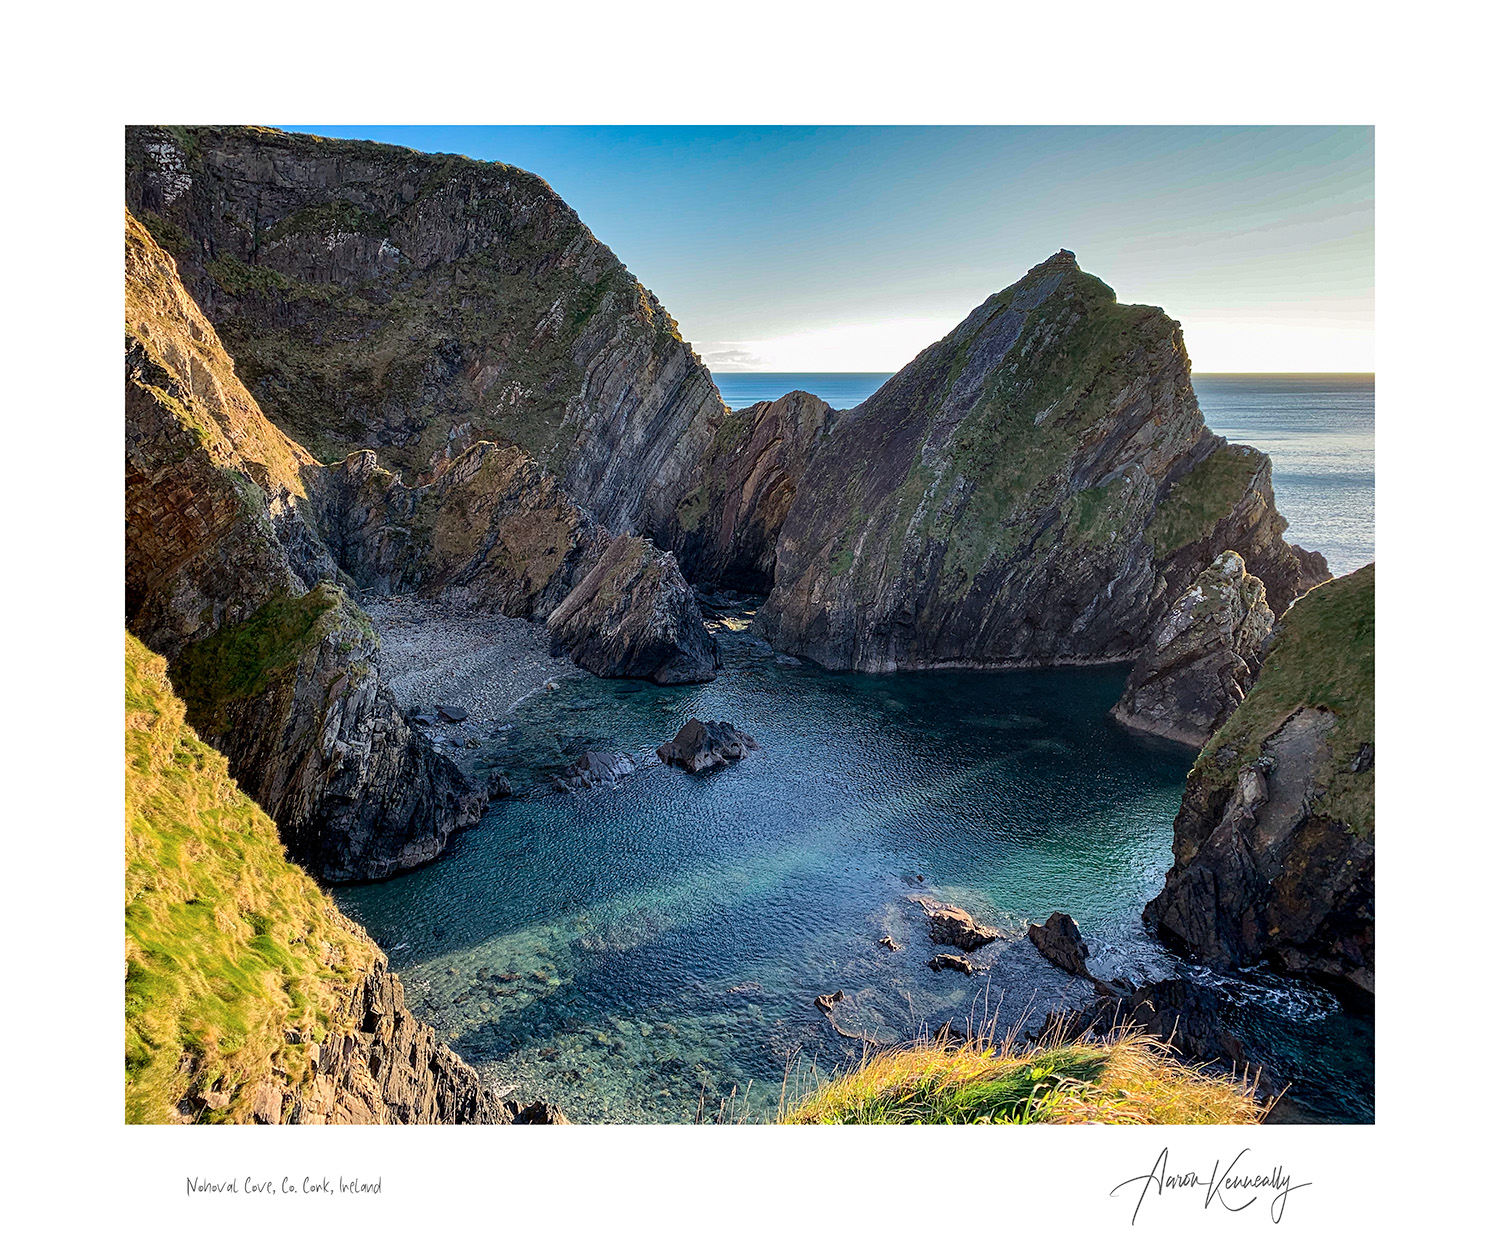 Nohoval Cove, Co. Cork